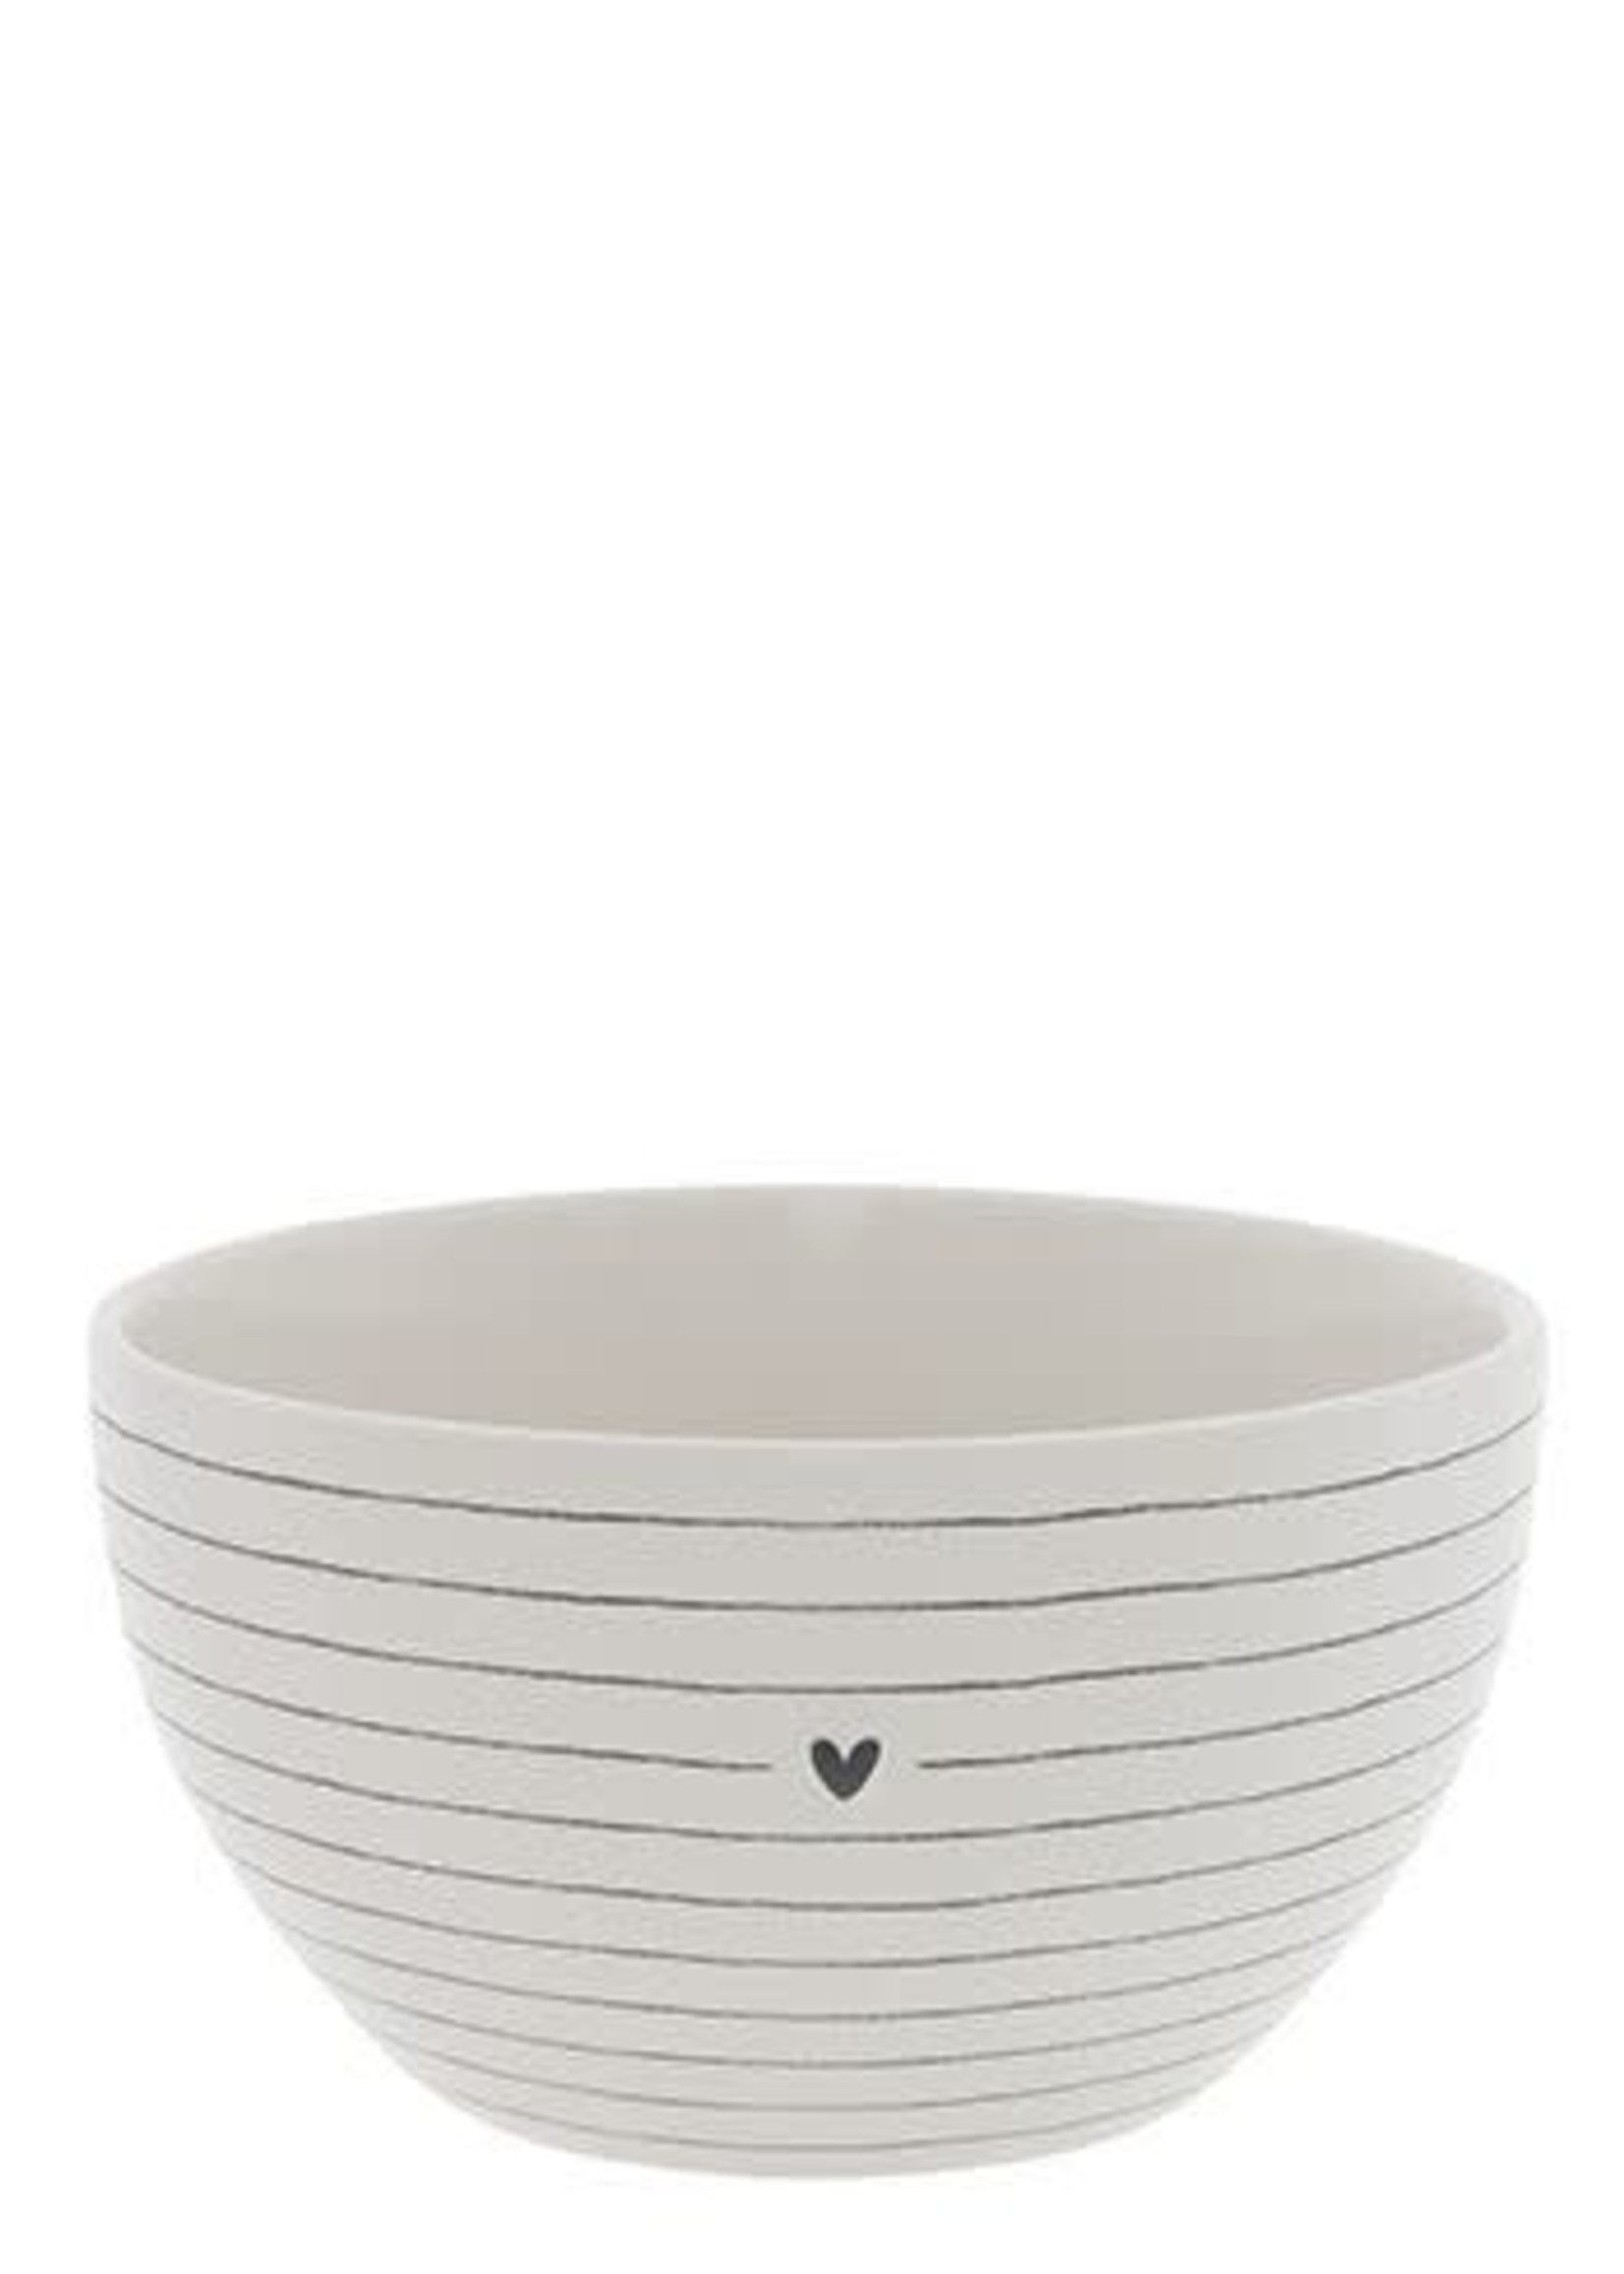 BASTION COLLECTIONS Bowl white stripes heart 13x7cm